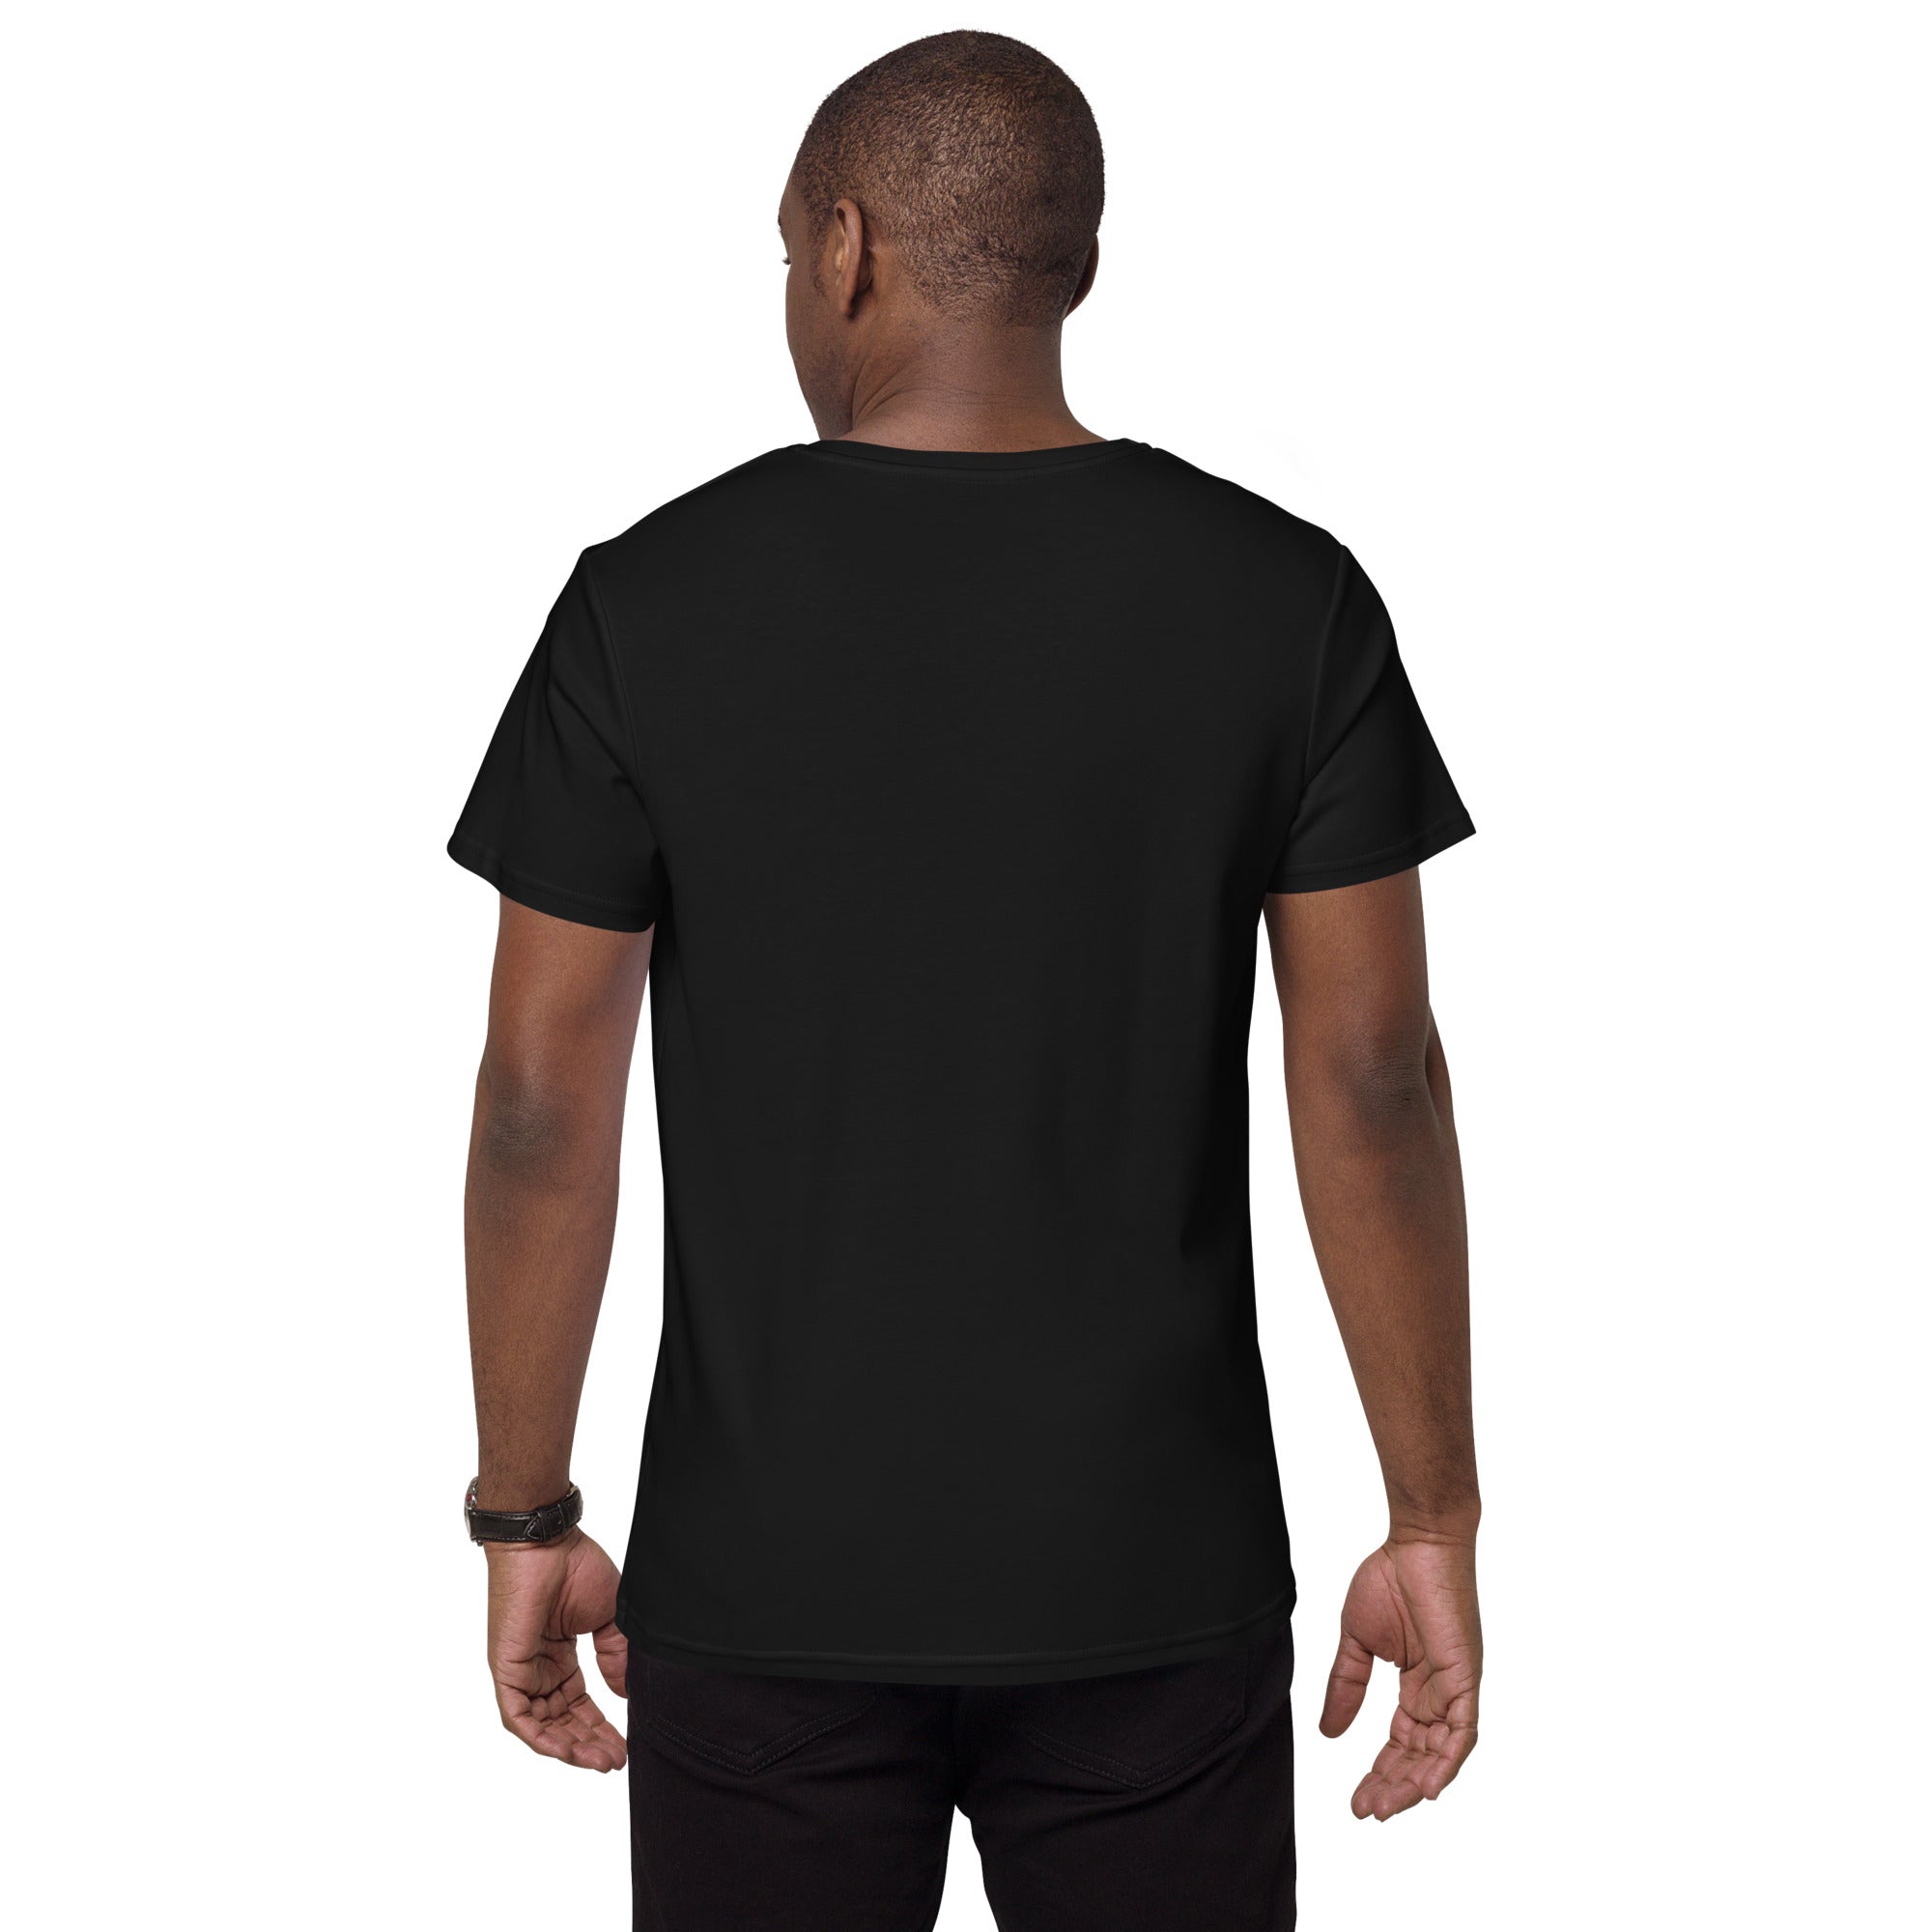 Men's premium cotton t-shirt - yoga top - Personal Hour for Yoga and Meditations 